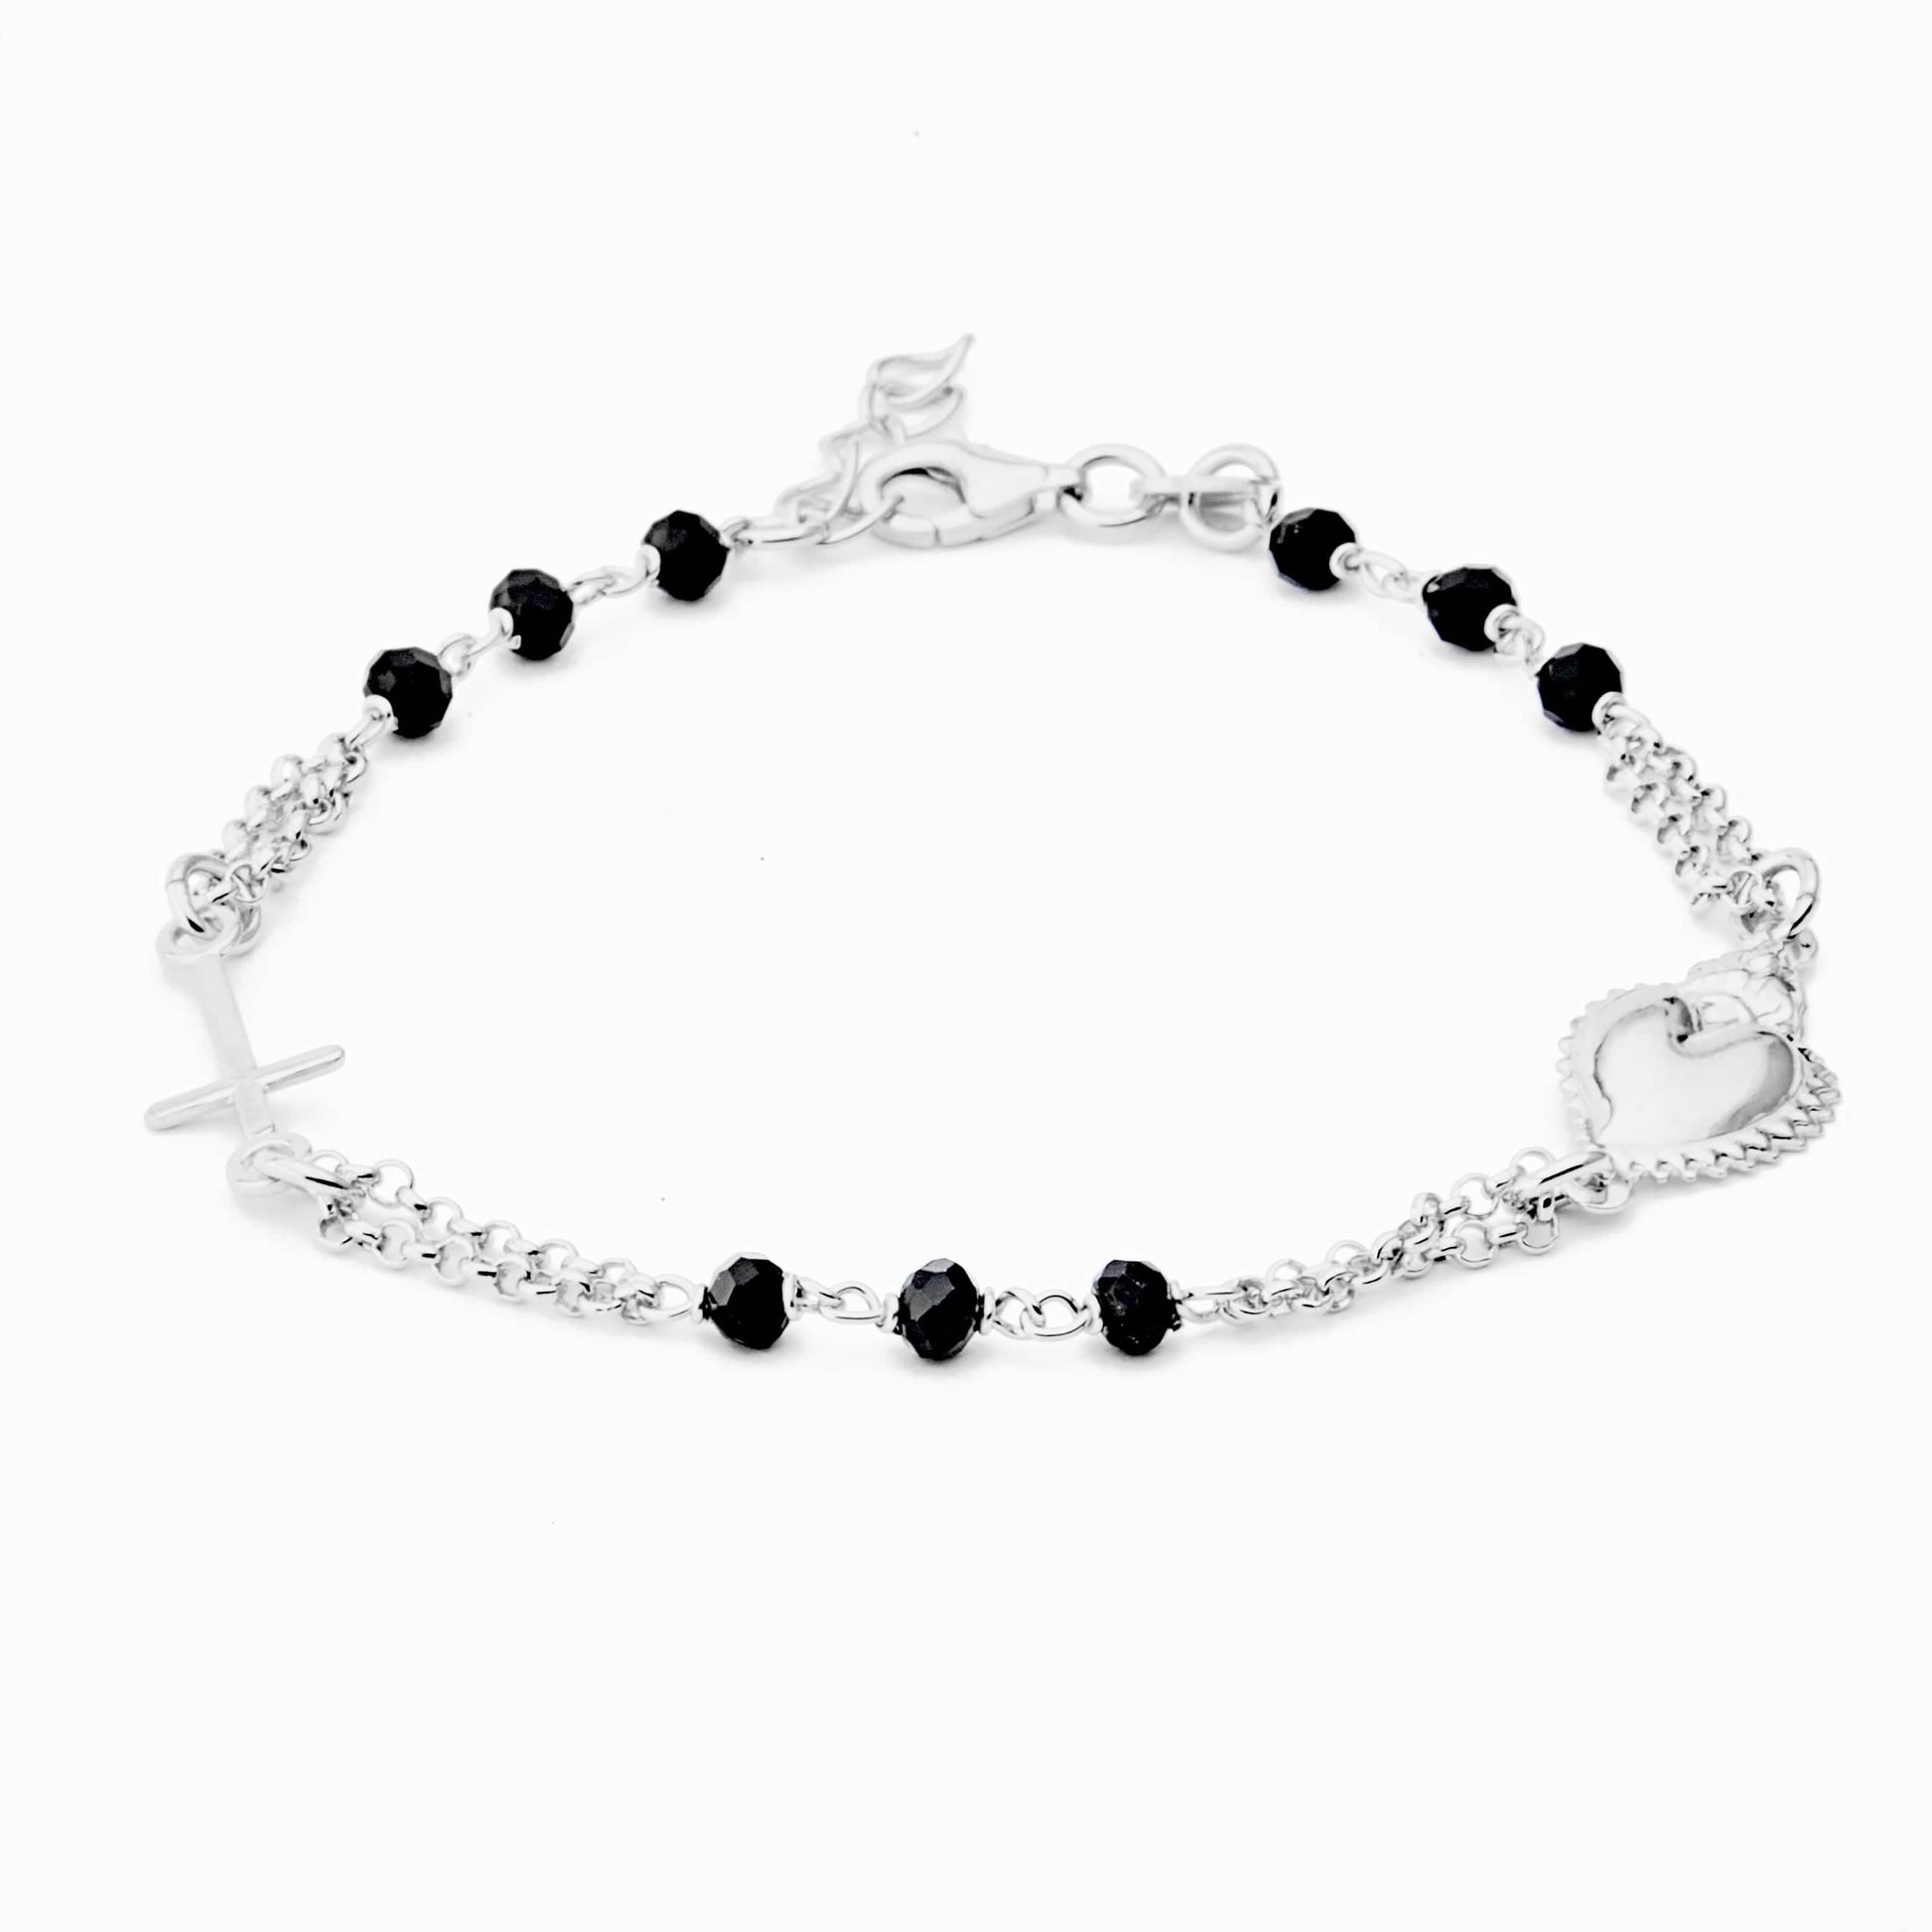 MONDO CATTOLICO Prayer Beads Rhodium / Cm 17.5 (6.9 in) / Cm 3 (1.2 in) STERLING SILVER ROSARY BRACELET SACRED HEART BLACK FACETED BEADS